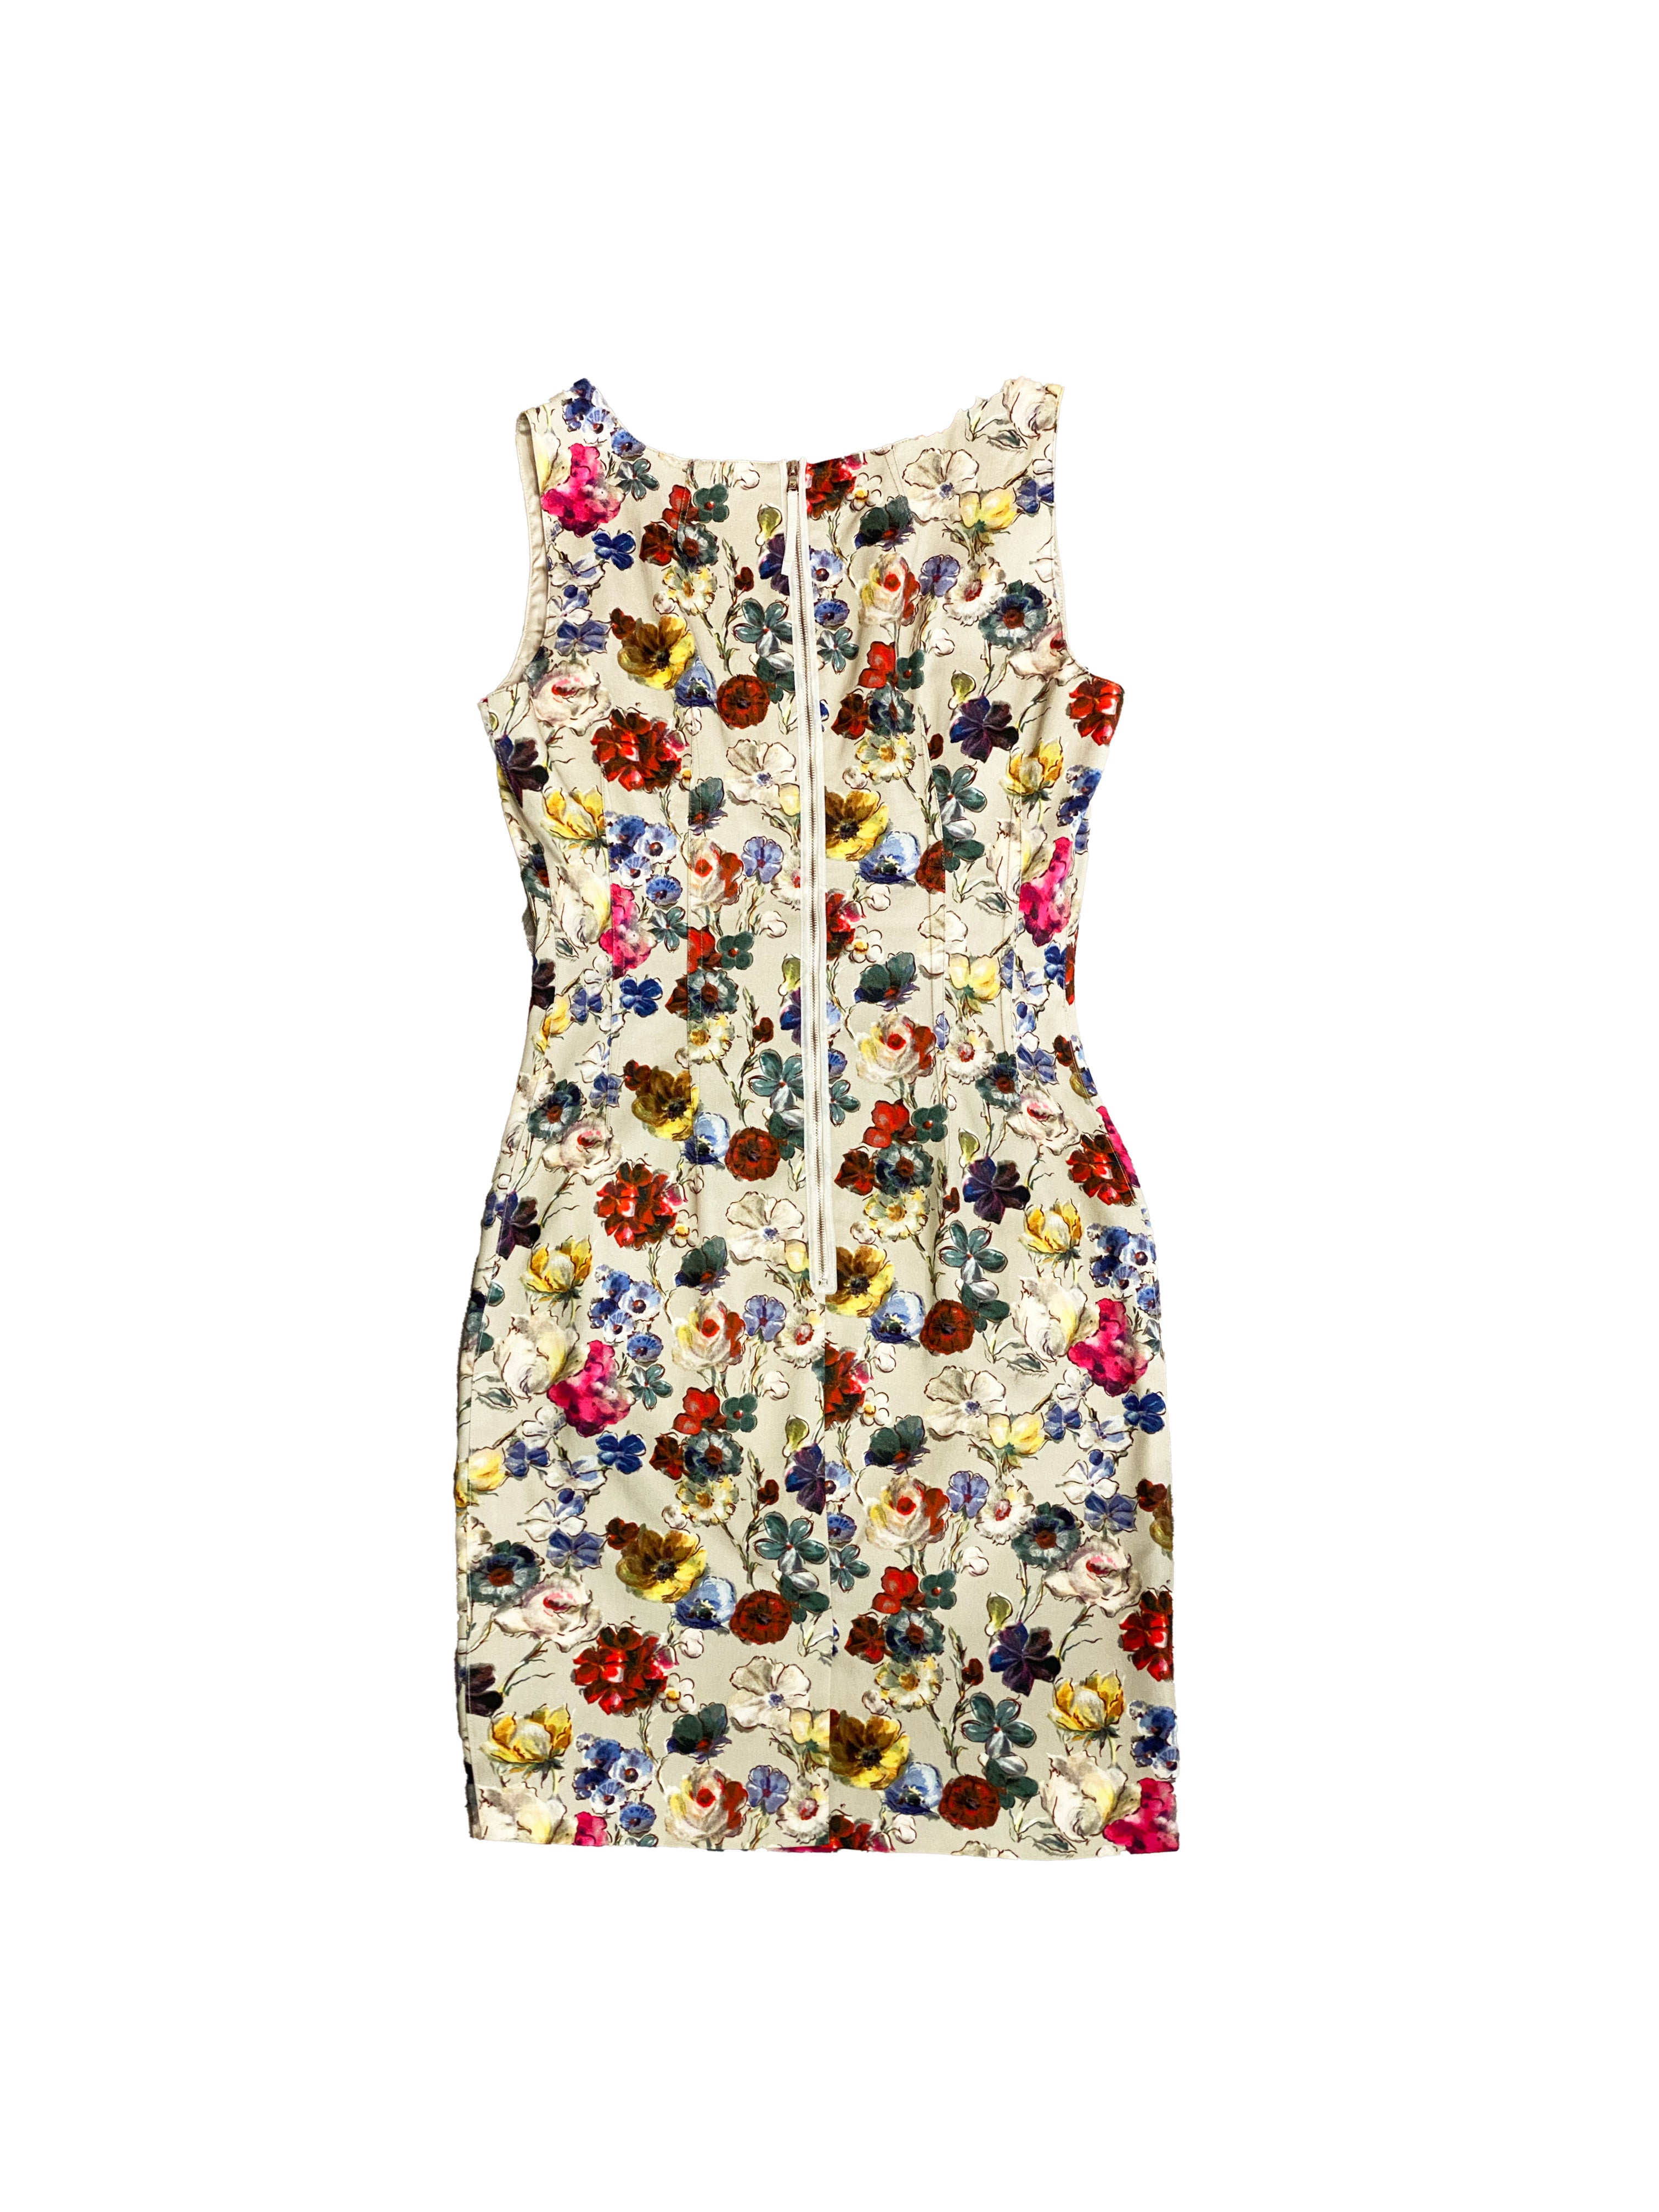 Dolce and Gabbana 1990s Cream Floral Dress